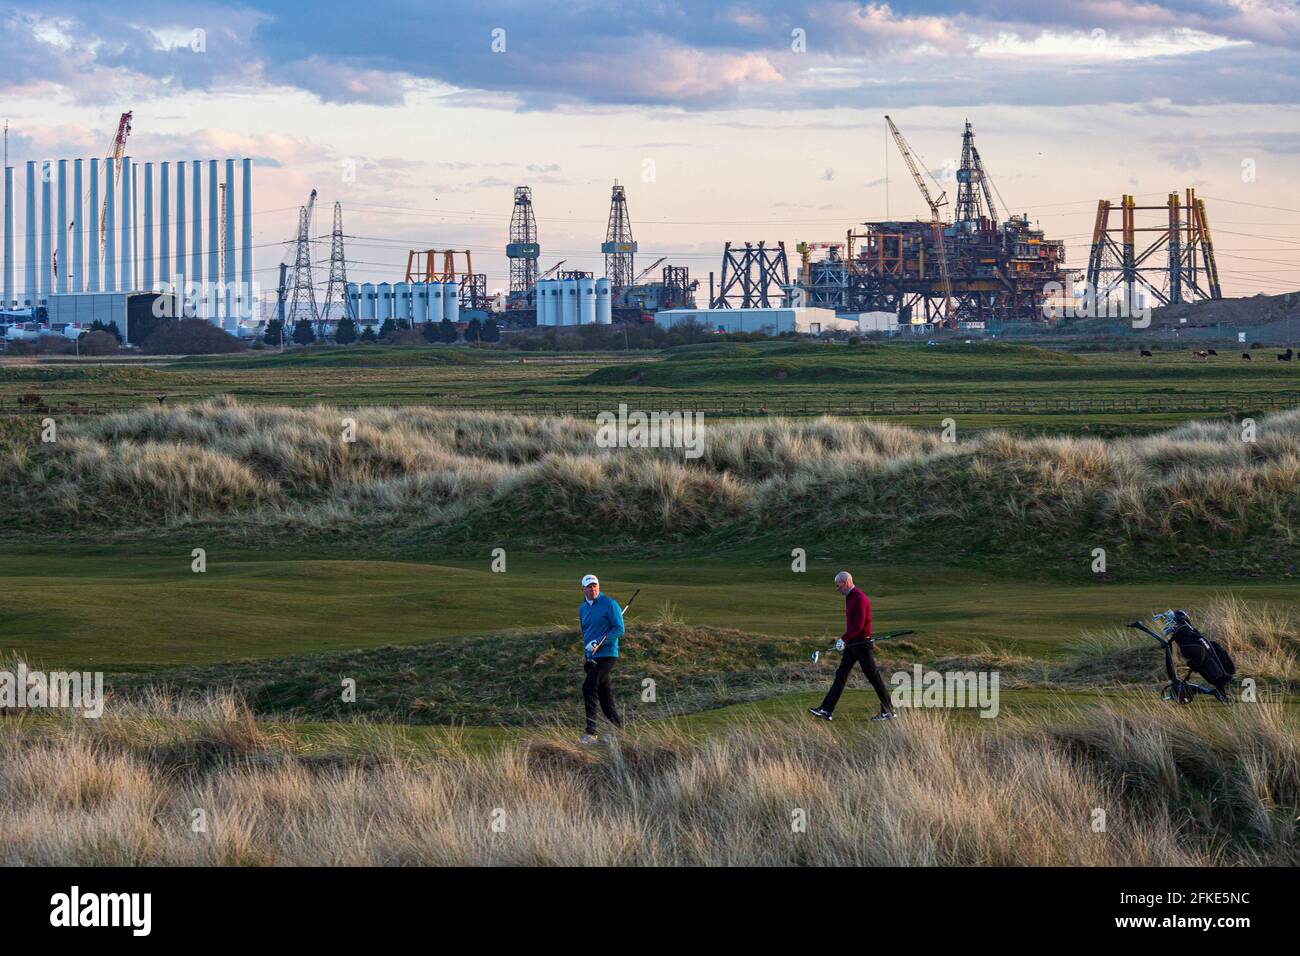 Golf player playing at Seaton Carew Golf Club with the Top Deck of Shell Brent offshore platform being dismantled and recycled at Able UK in distance Stock Photo